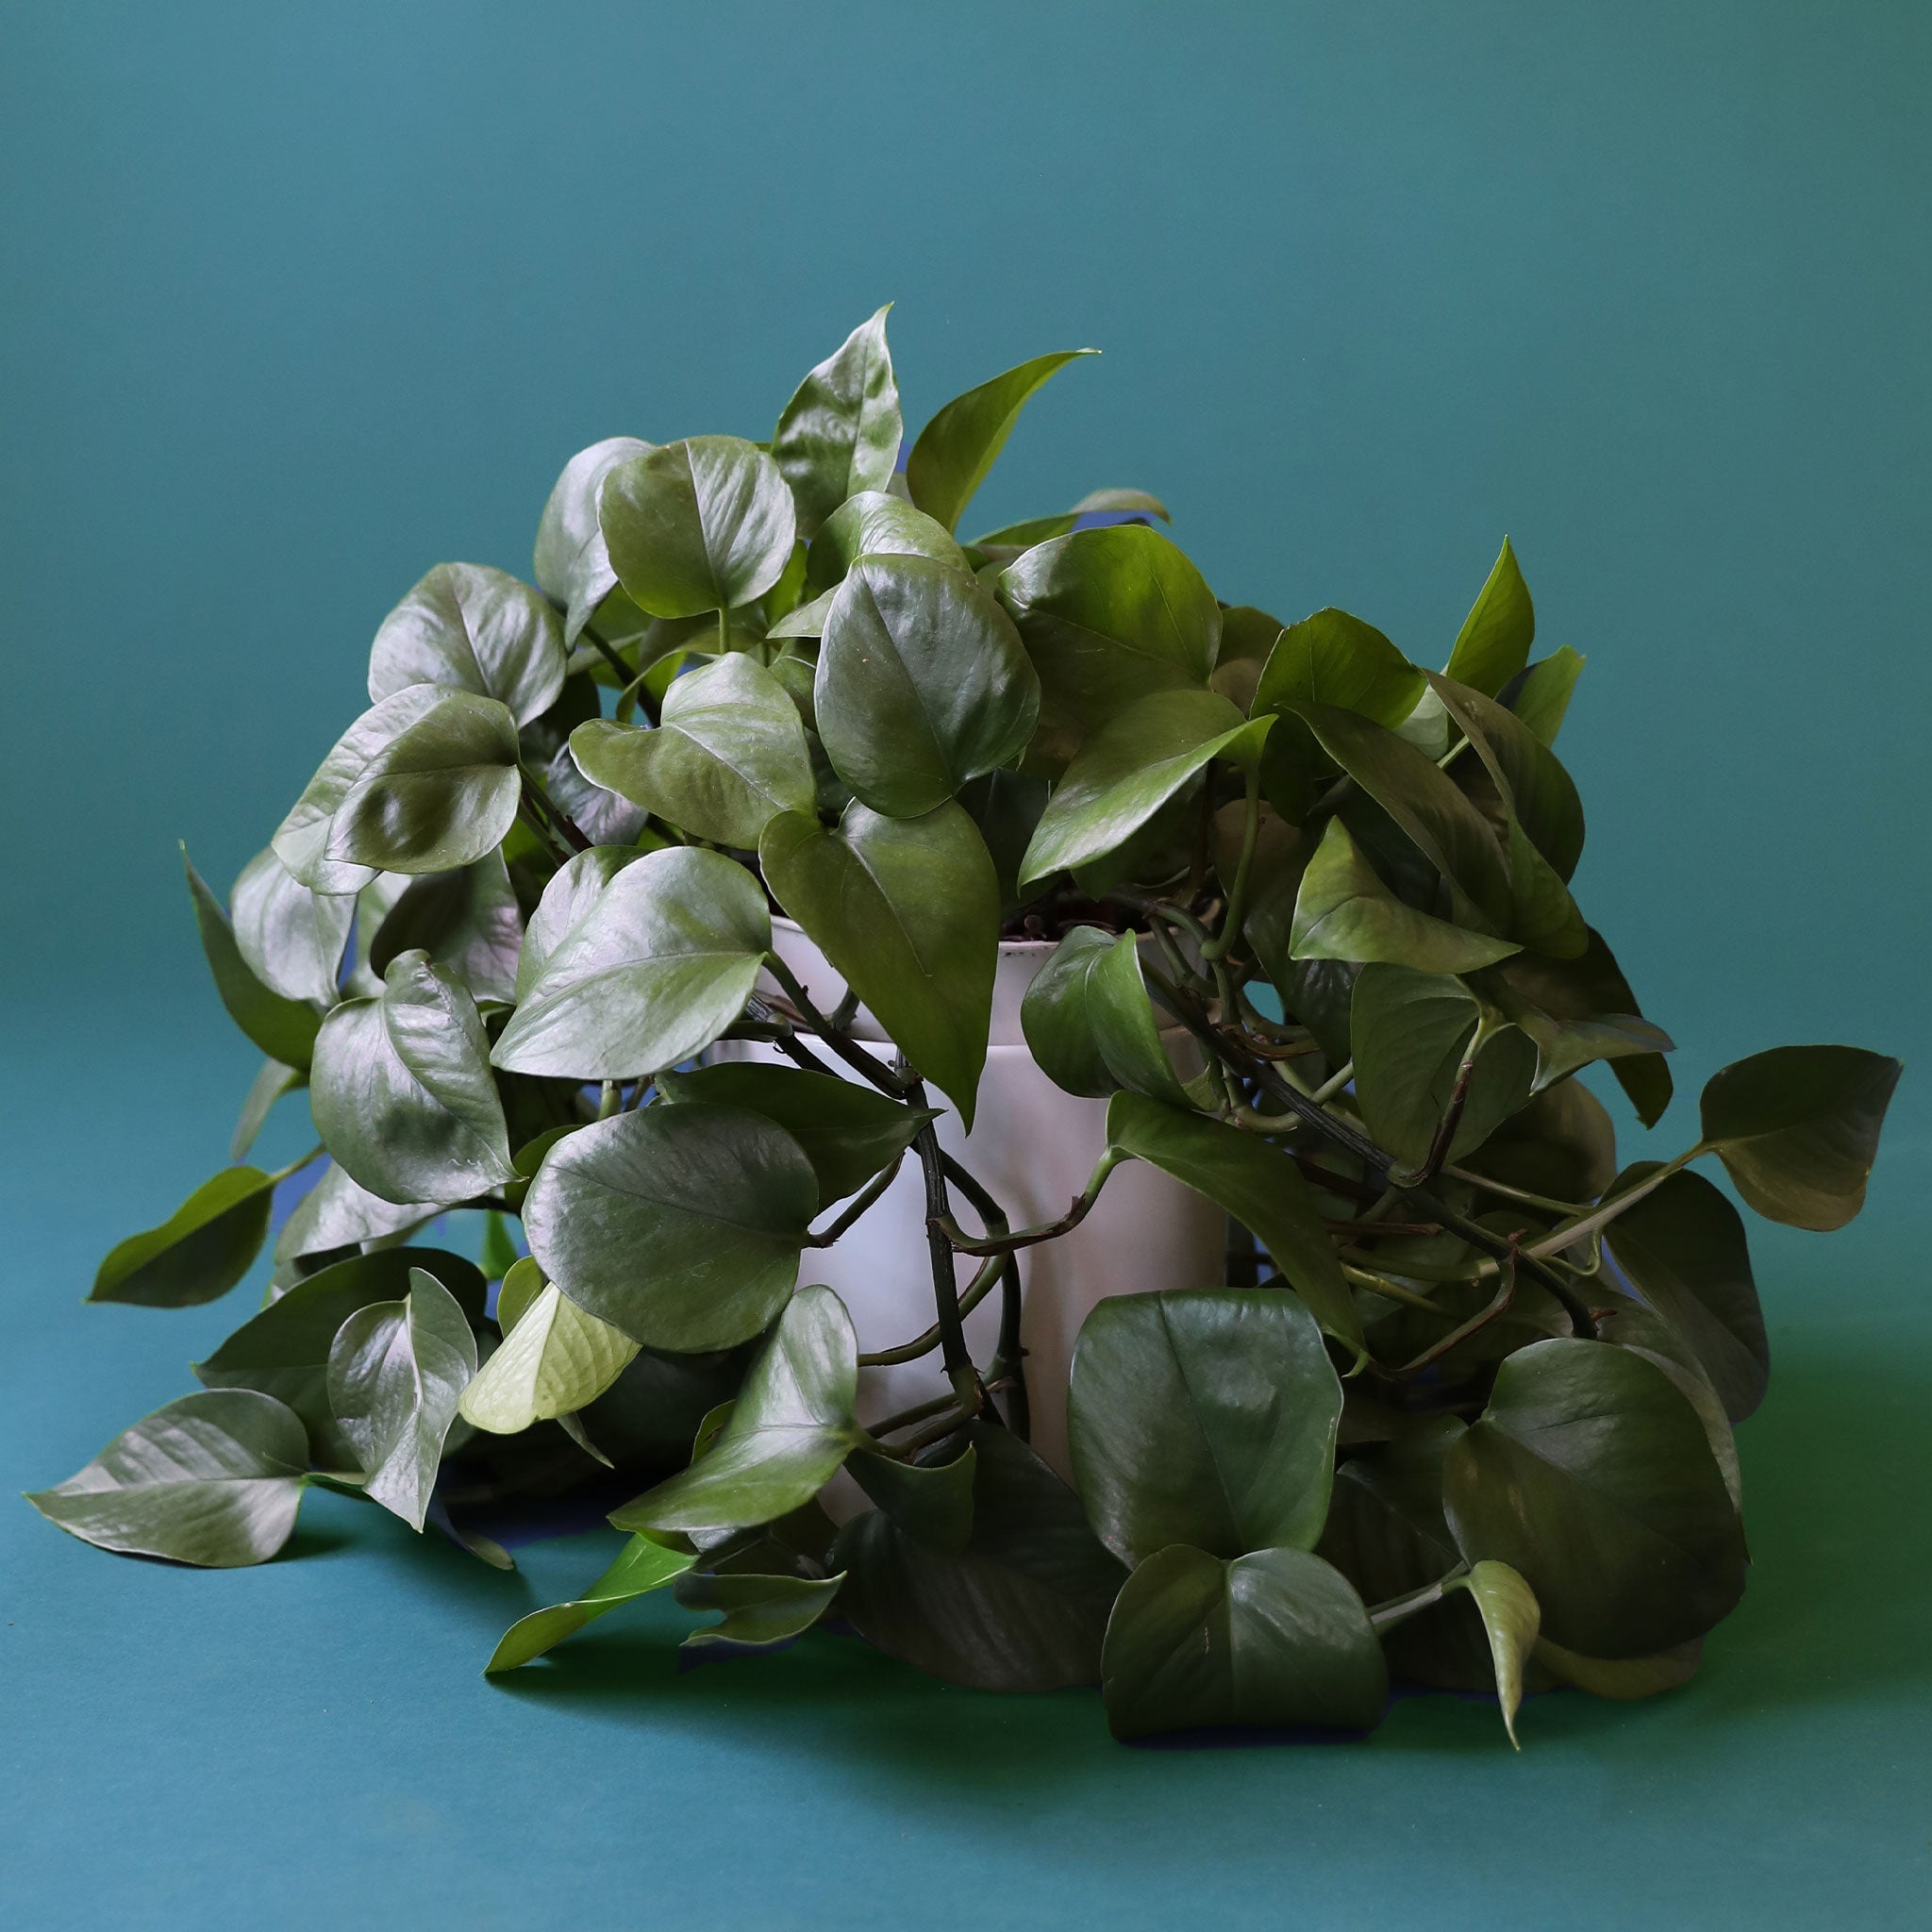 In front of a dark green background is a white cylinder pot with a green pothos inside. The plant has long green vines that fall to the ground. The leaves are dark green.